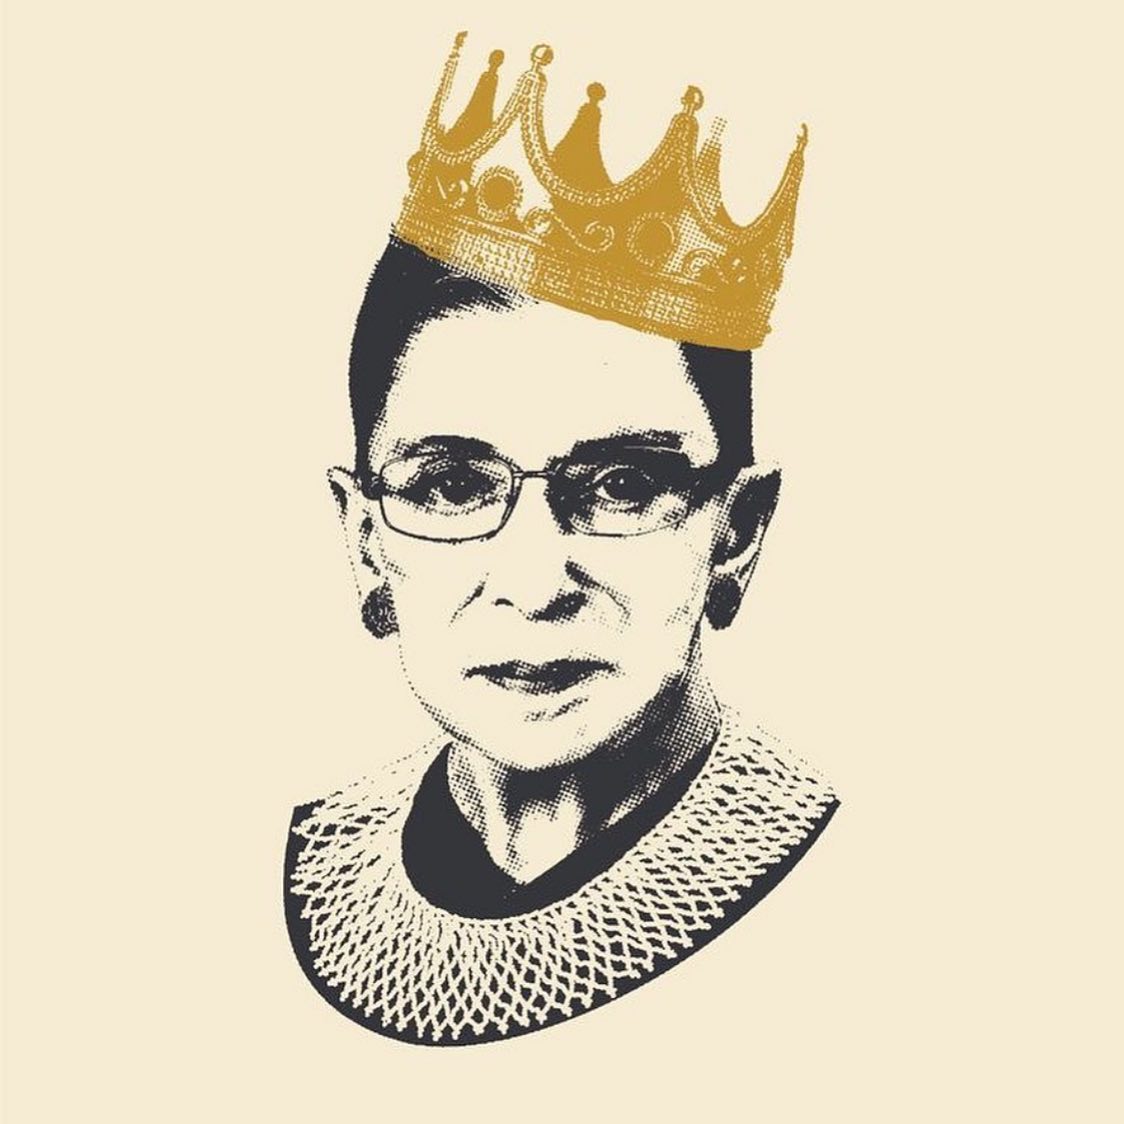 Queen Ruth Bader Ginsburg we will forever be in your debt. Let your legacy live on.  Rest Peacefully.